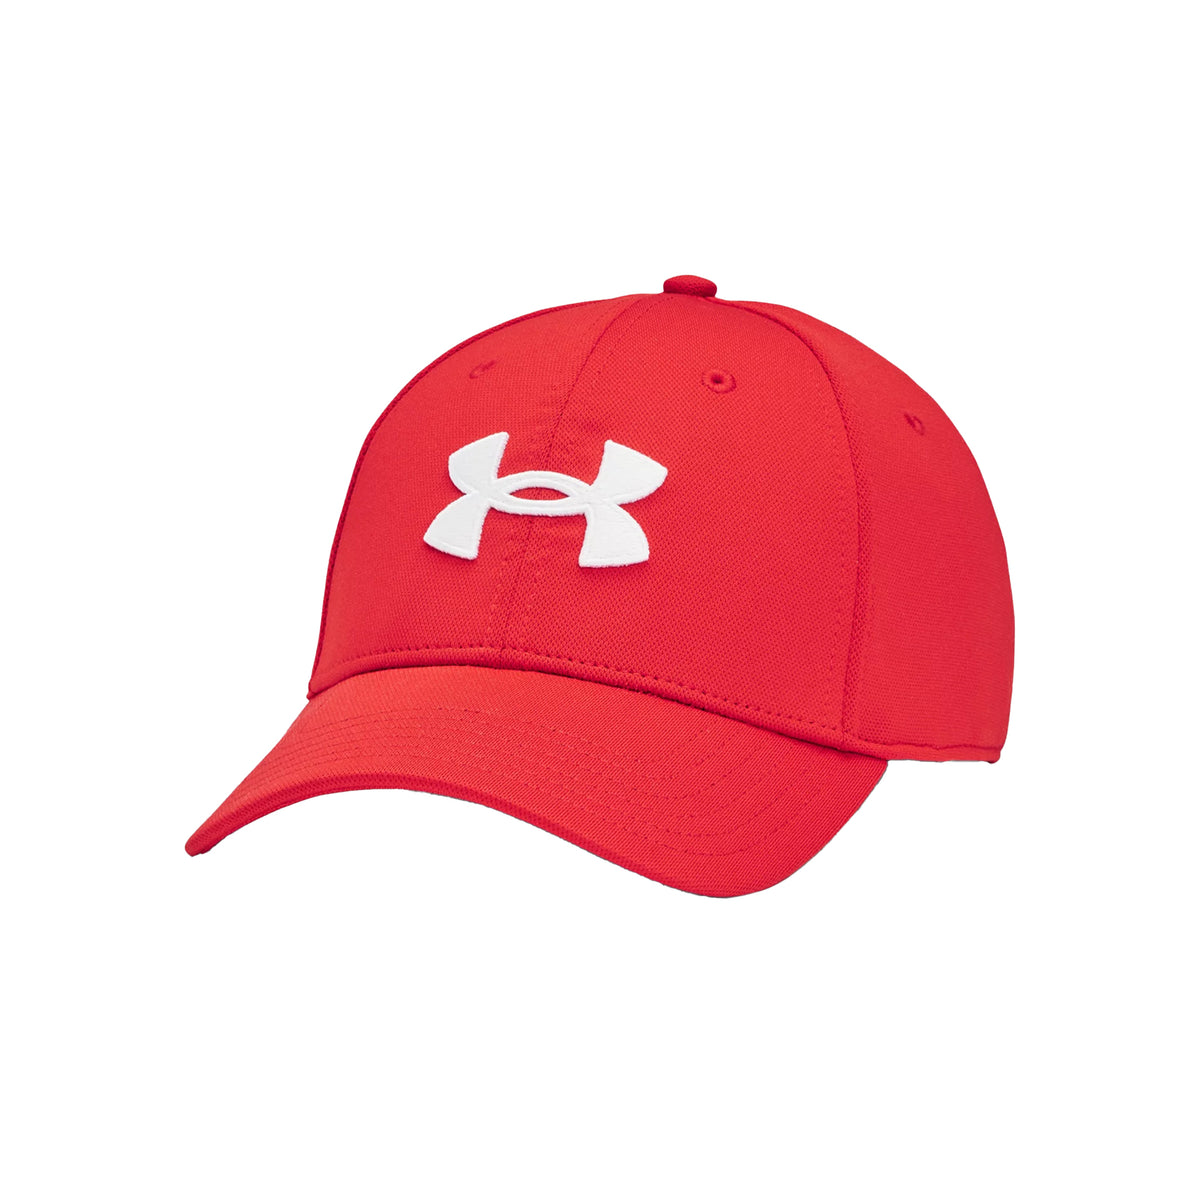 Under Armour Blitzing Baseball Cap: Red/White